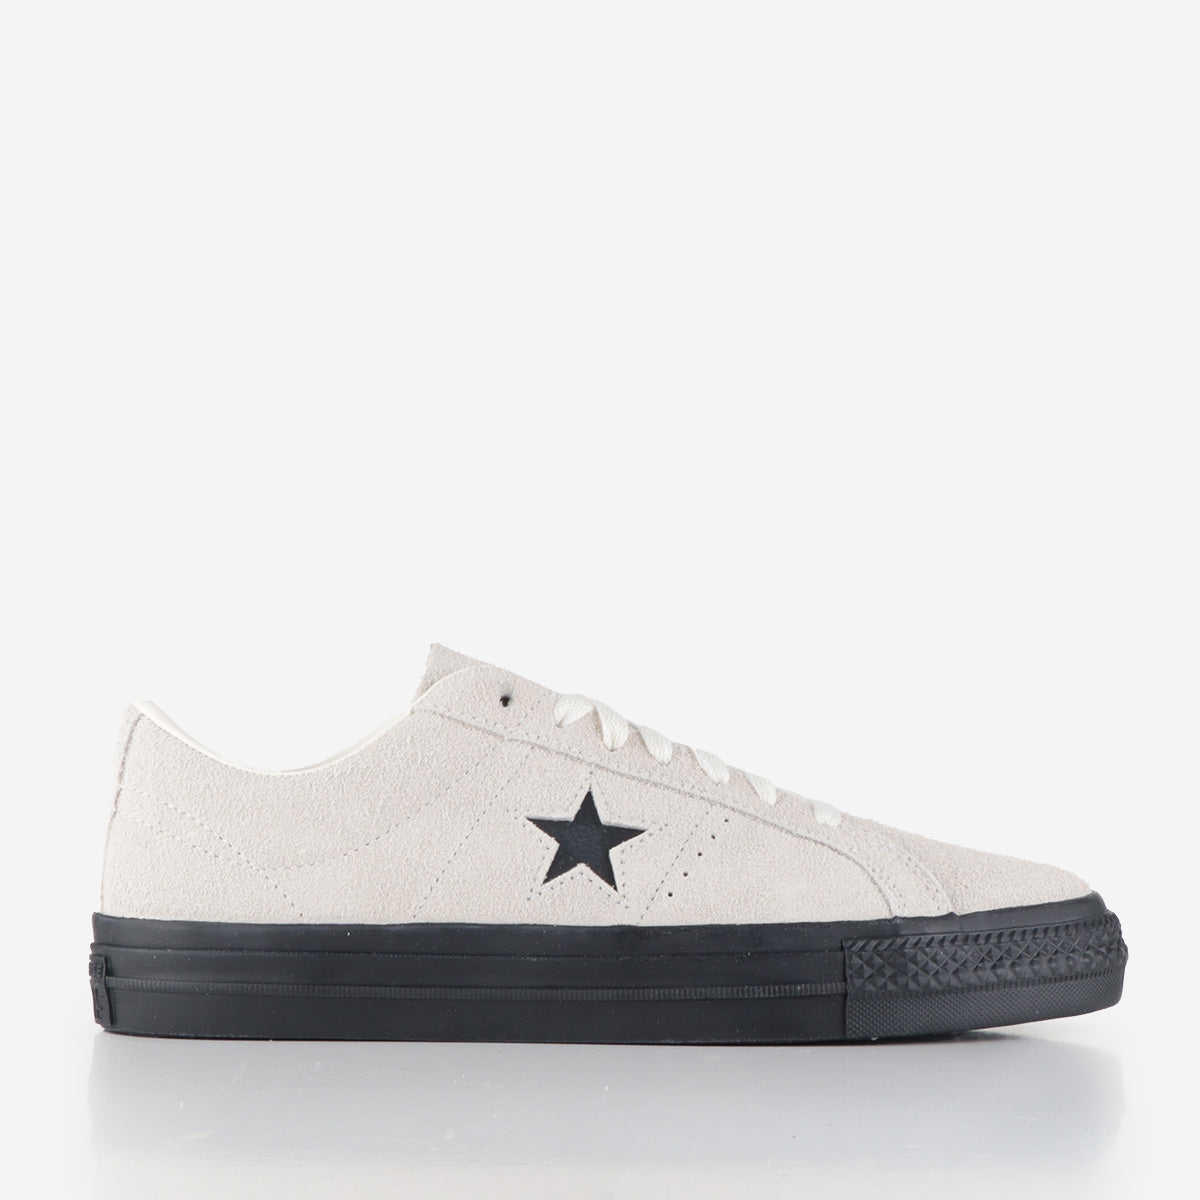 Converse One Star Pro Shaggy Suede Ox Shoes